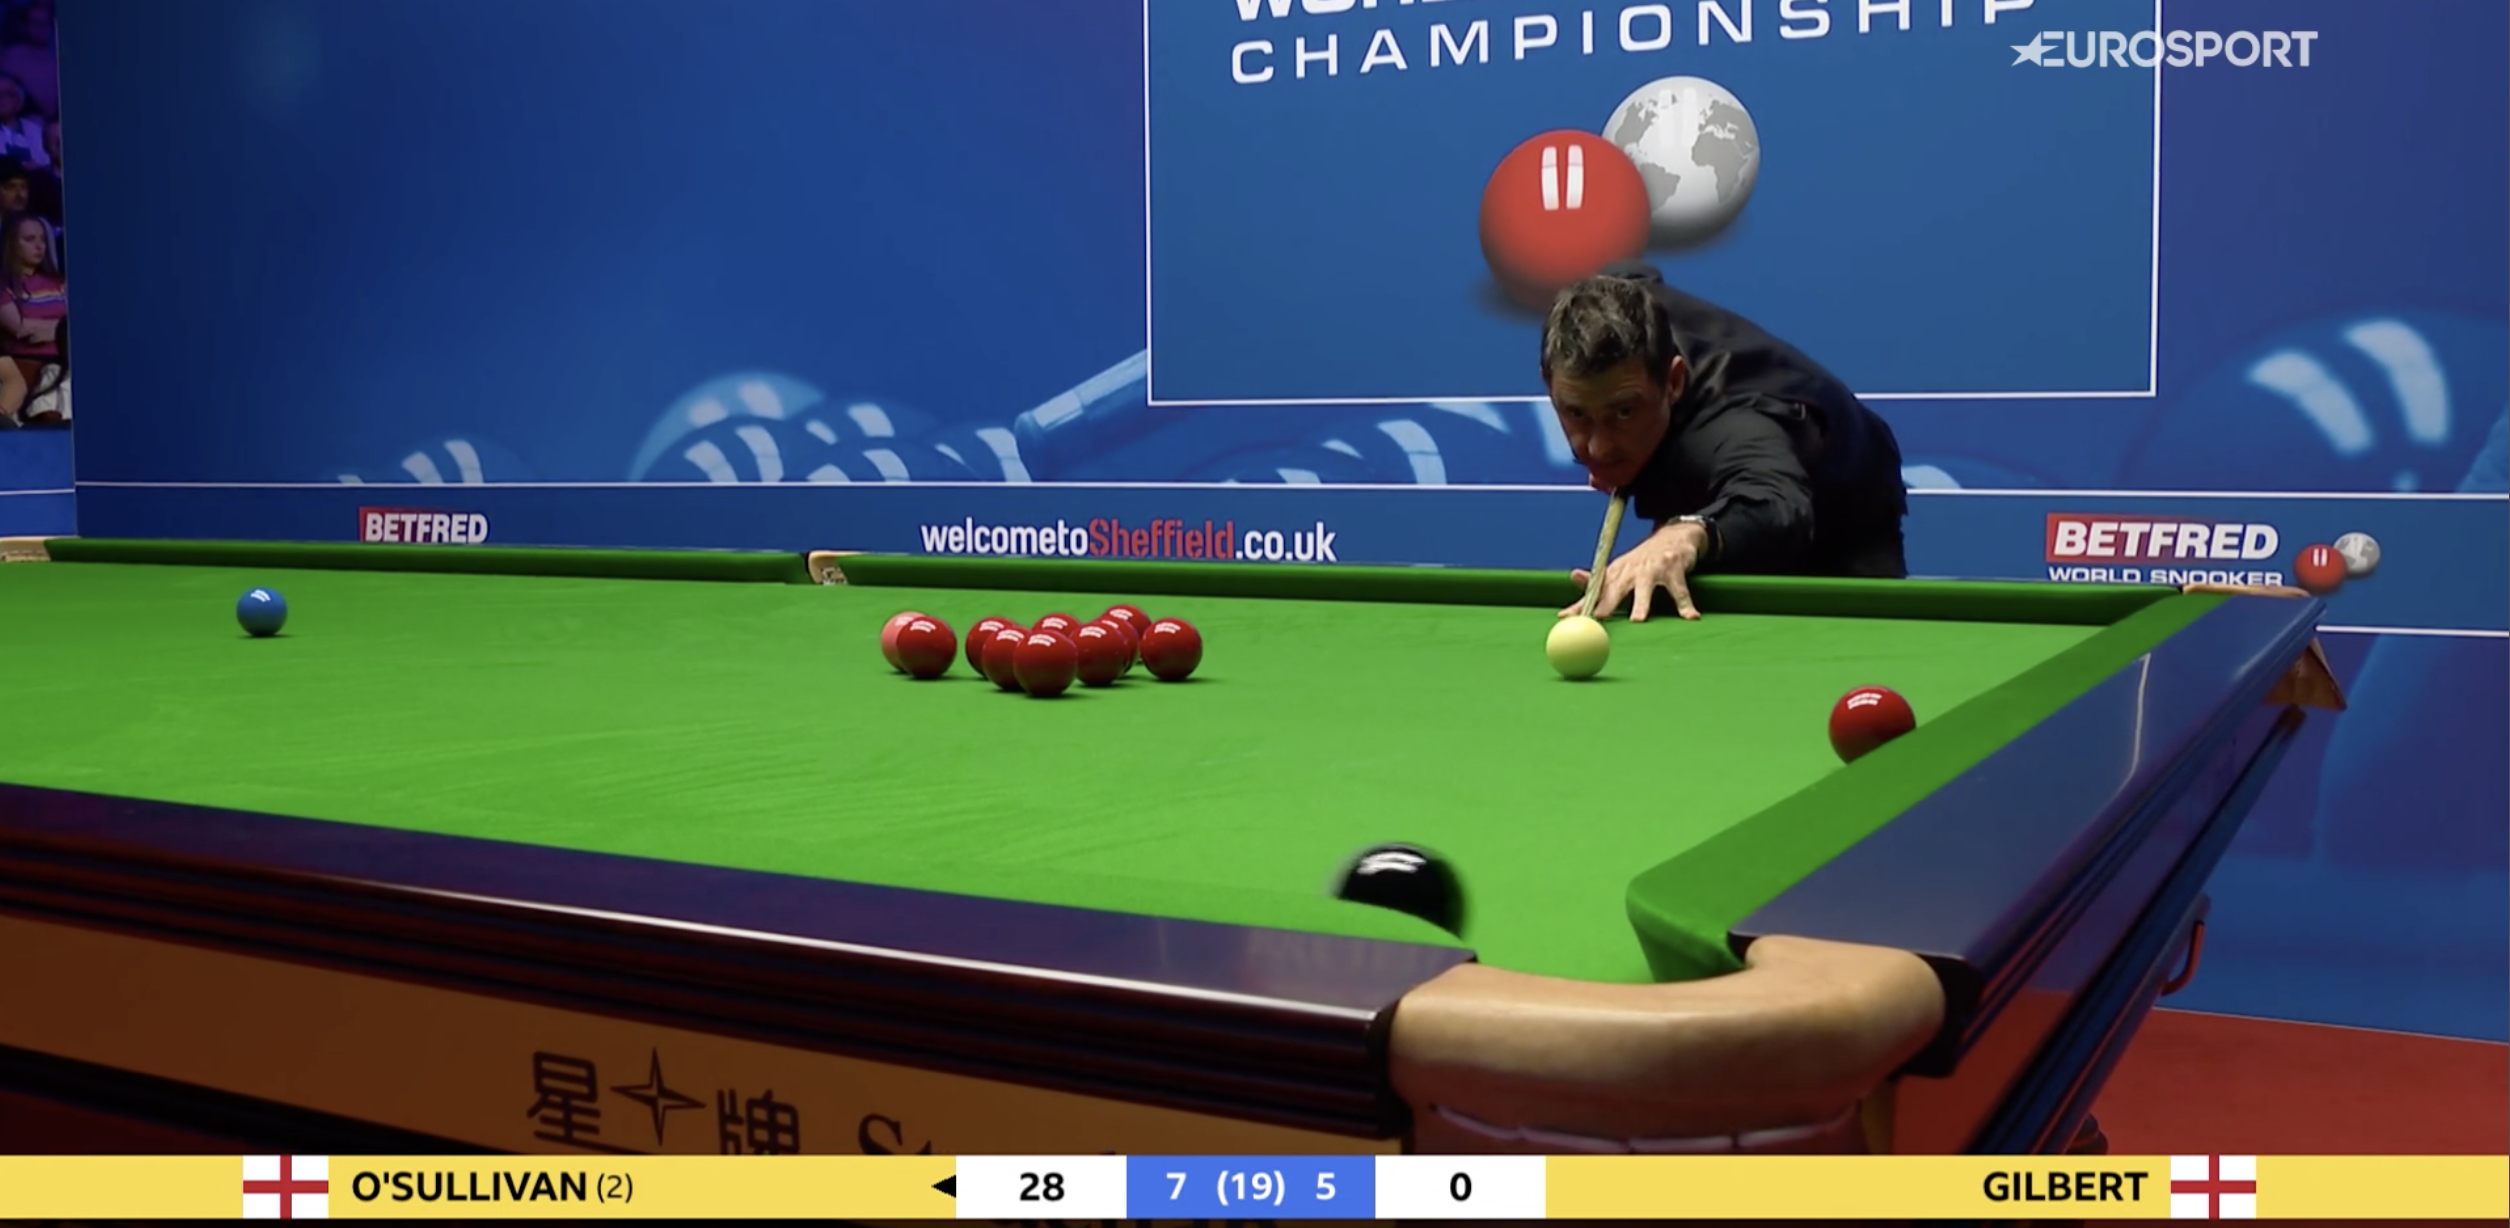 Ronnie OSullivan faces disciplinary action after lewd gesture at the Crucible was caught on camera